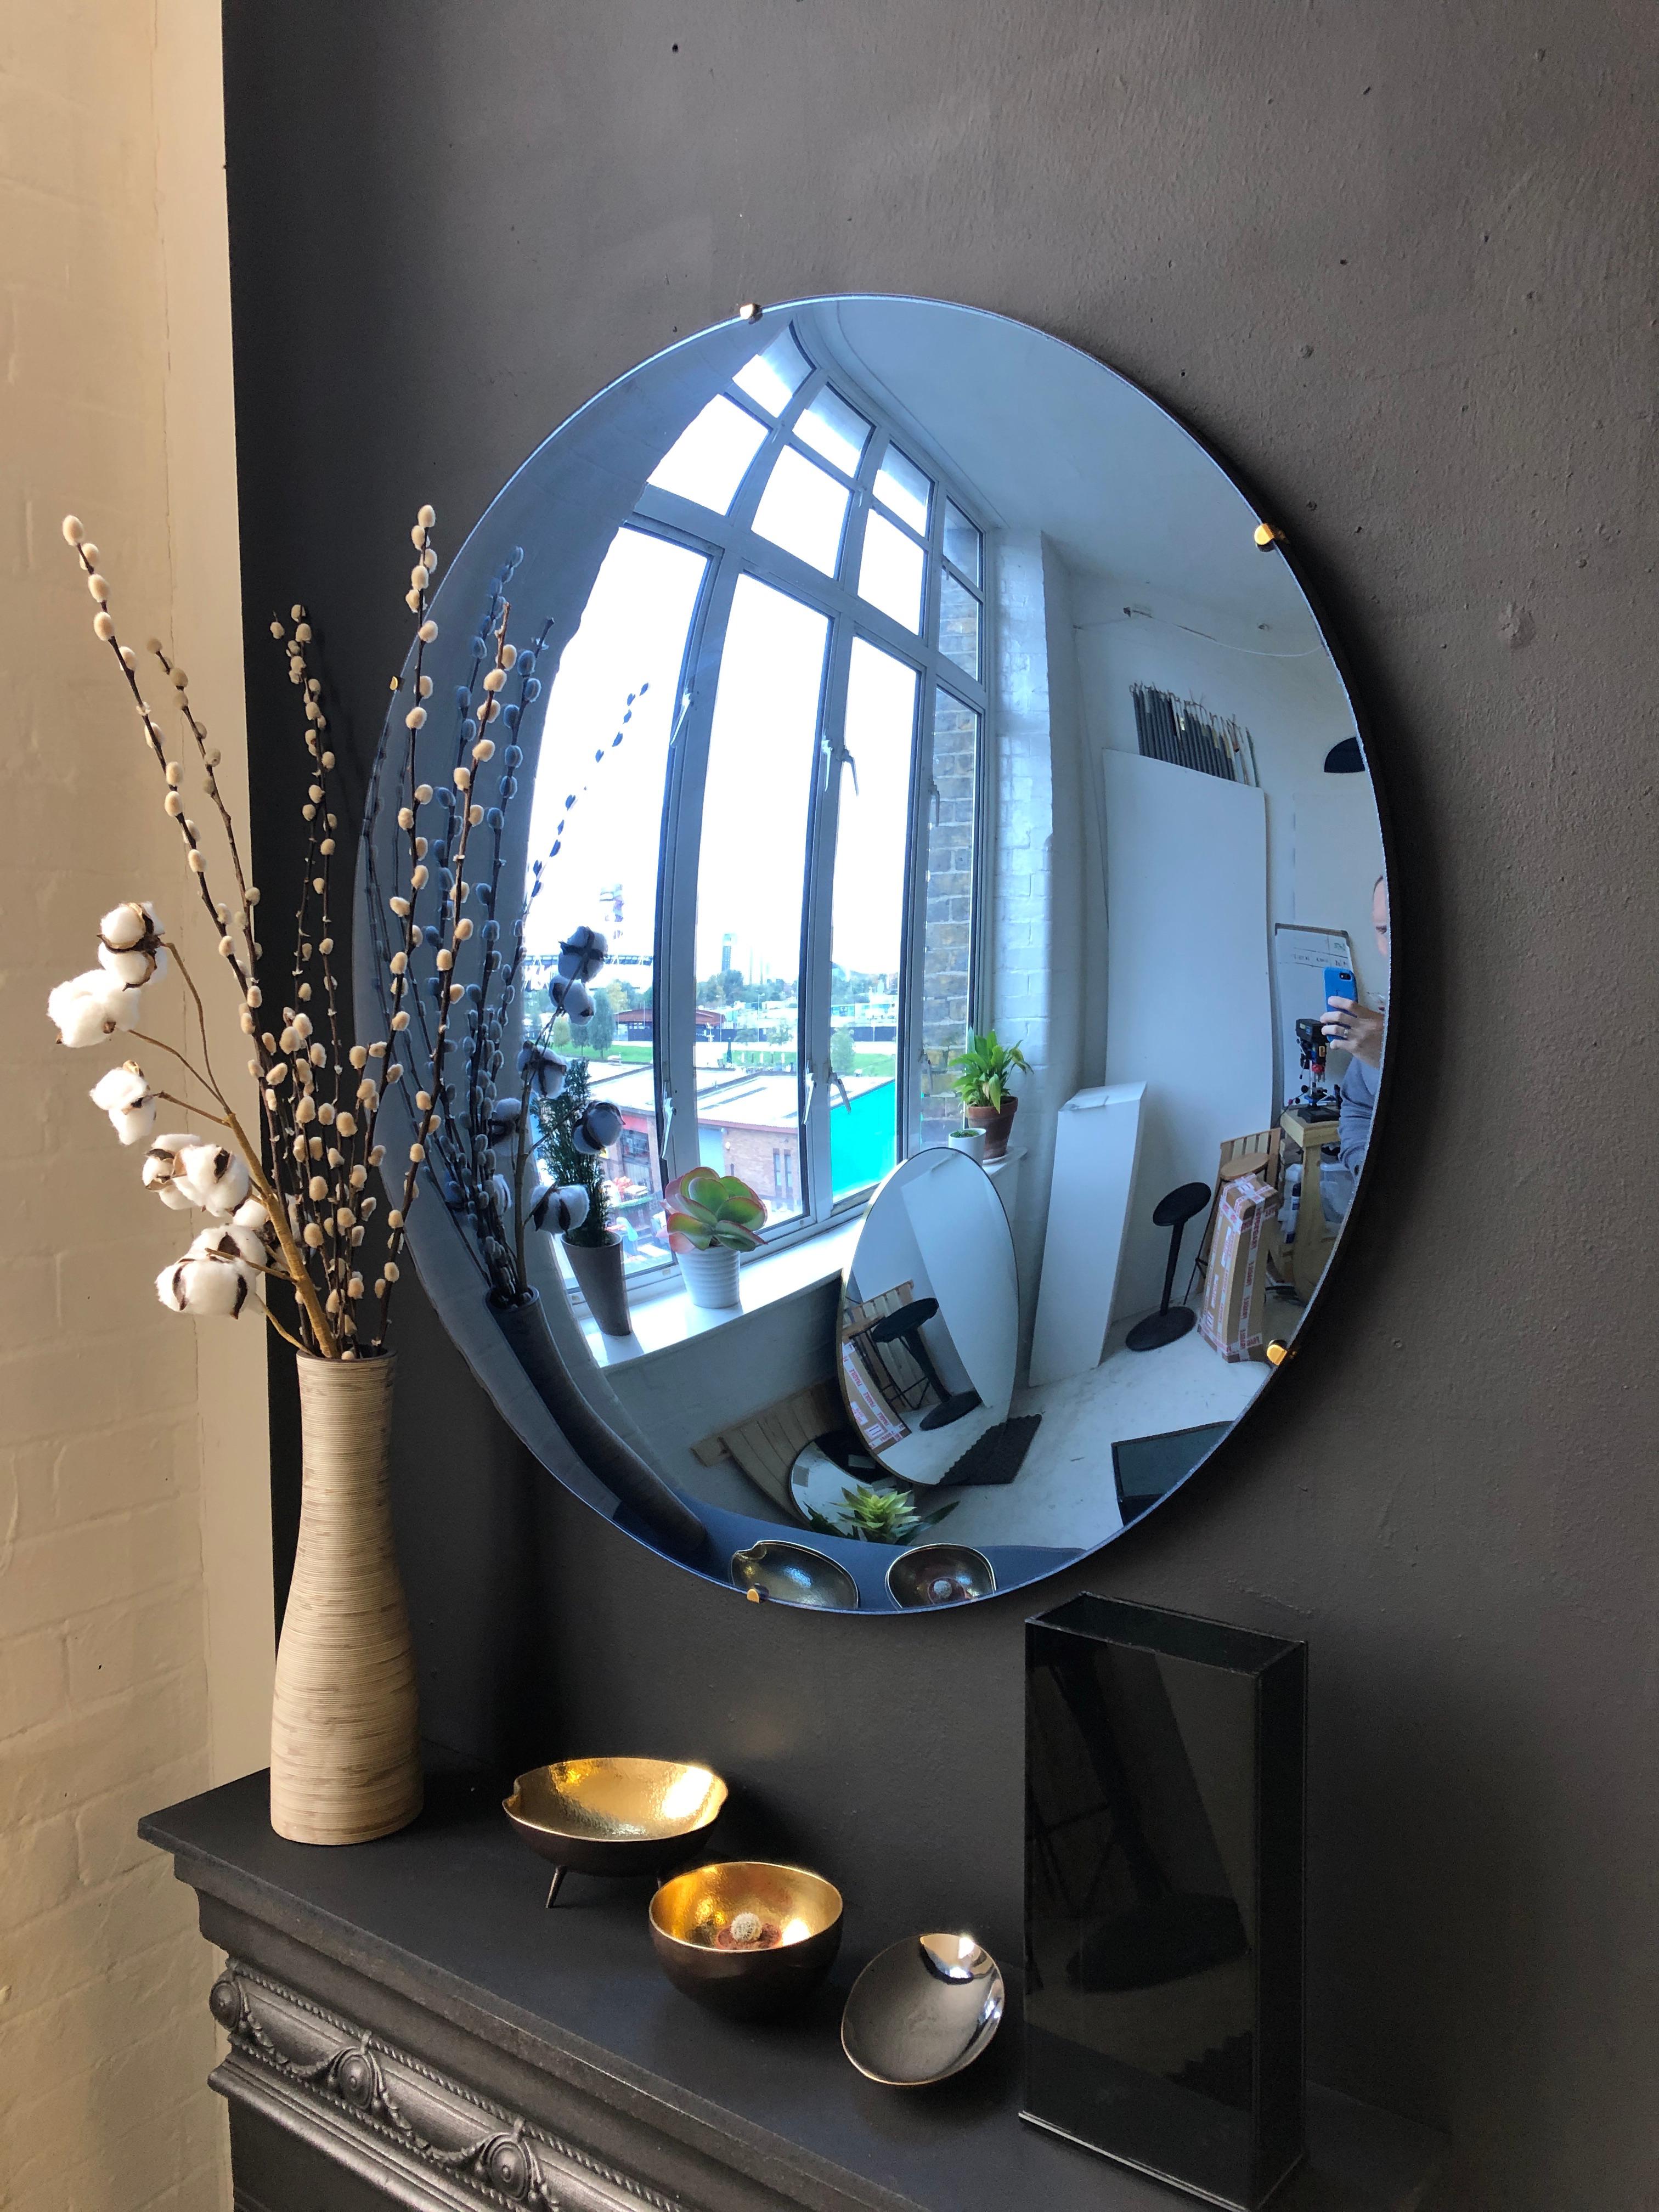 Stunning frameless blue convex mirror for a unique statement above a fireplace, a console table or anywhere in a home, hospitality or commercial space.

Each Orbis™ convex mirror is handcrafted. Slight variations in dimensions, tint and finish are